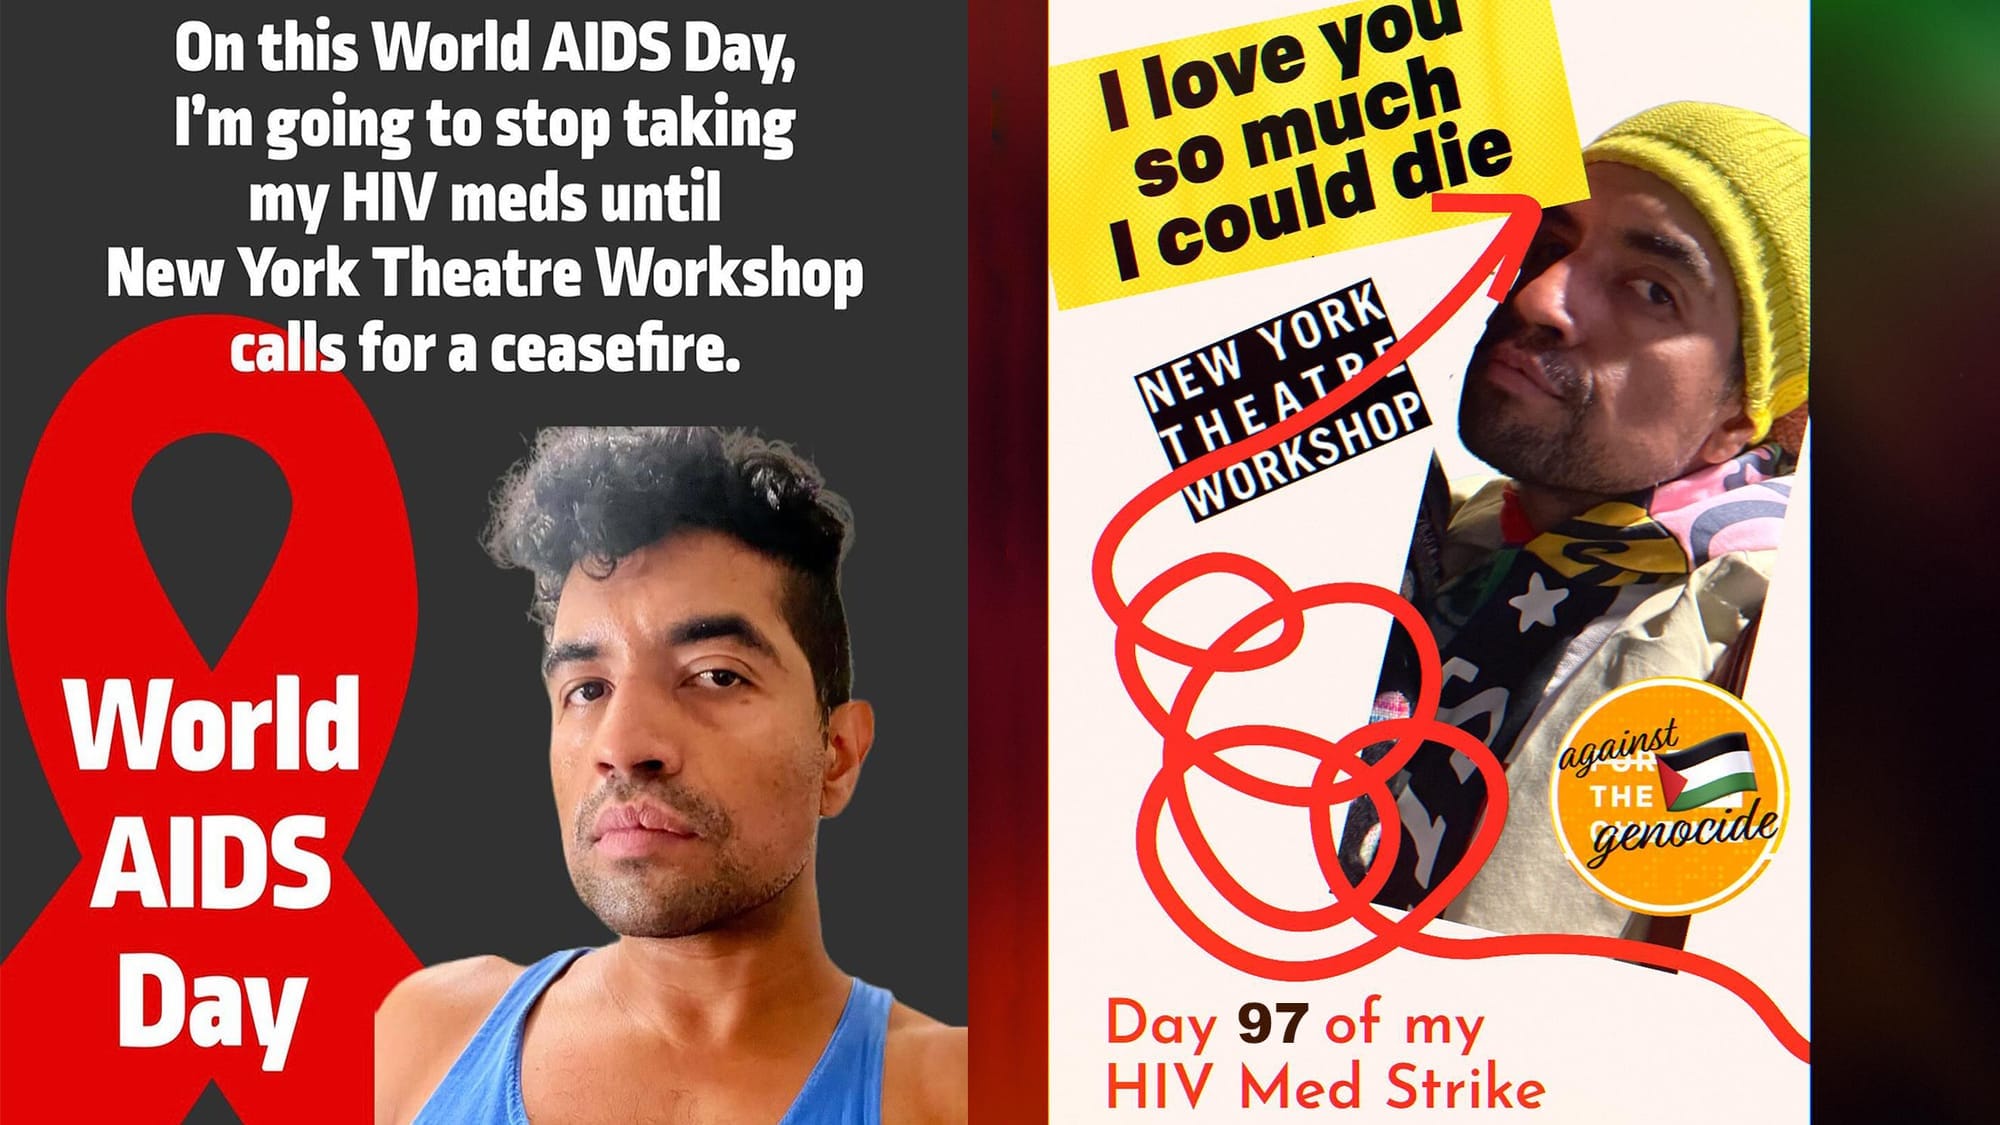 From playwright Victor I. Cazares's Instagram; an image on World AIDS Day, another commemorating Day 97 of their medstrike